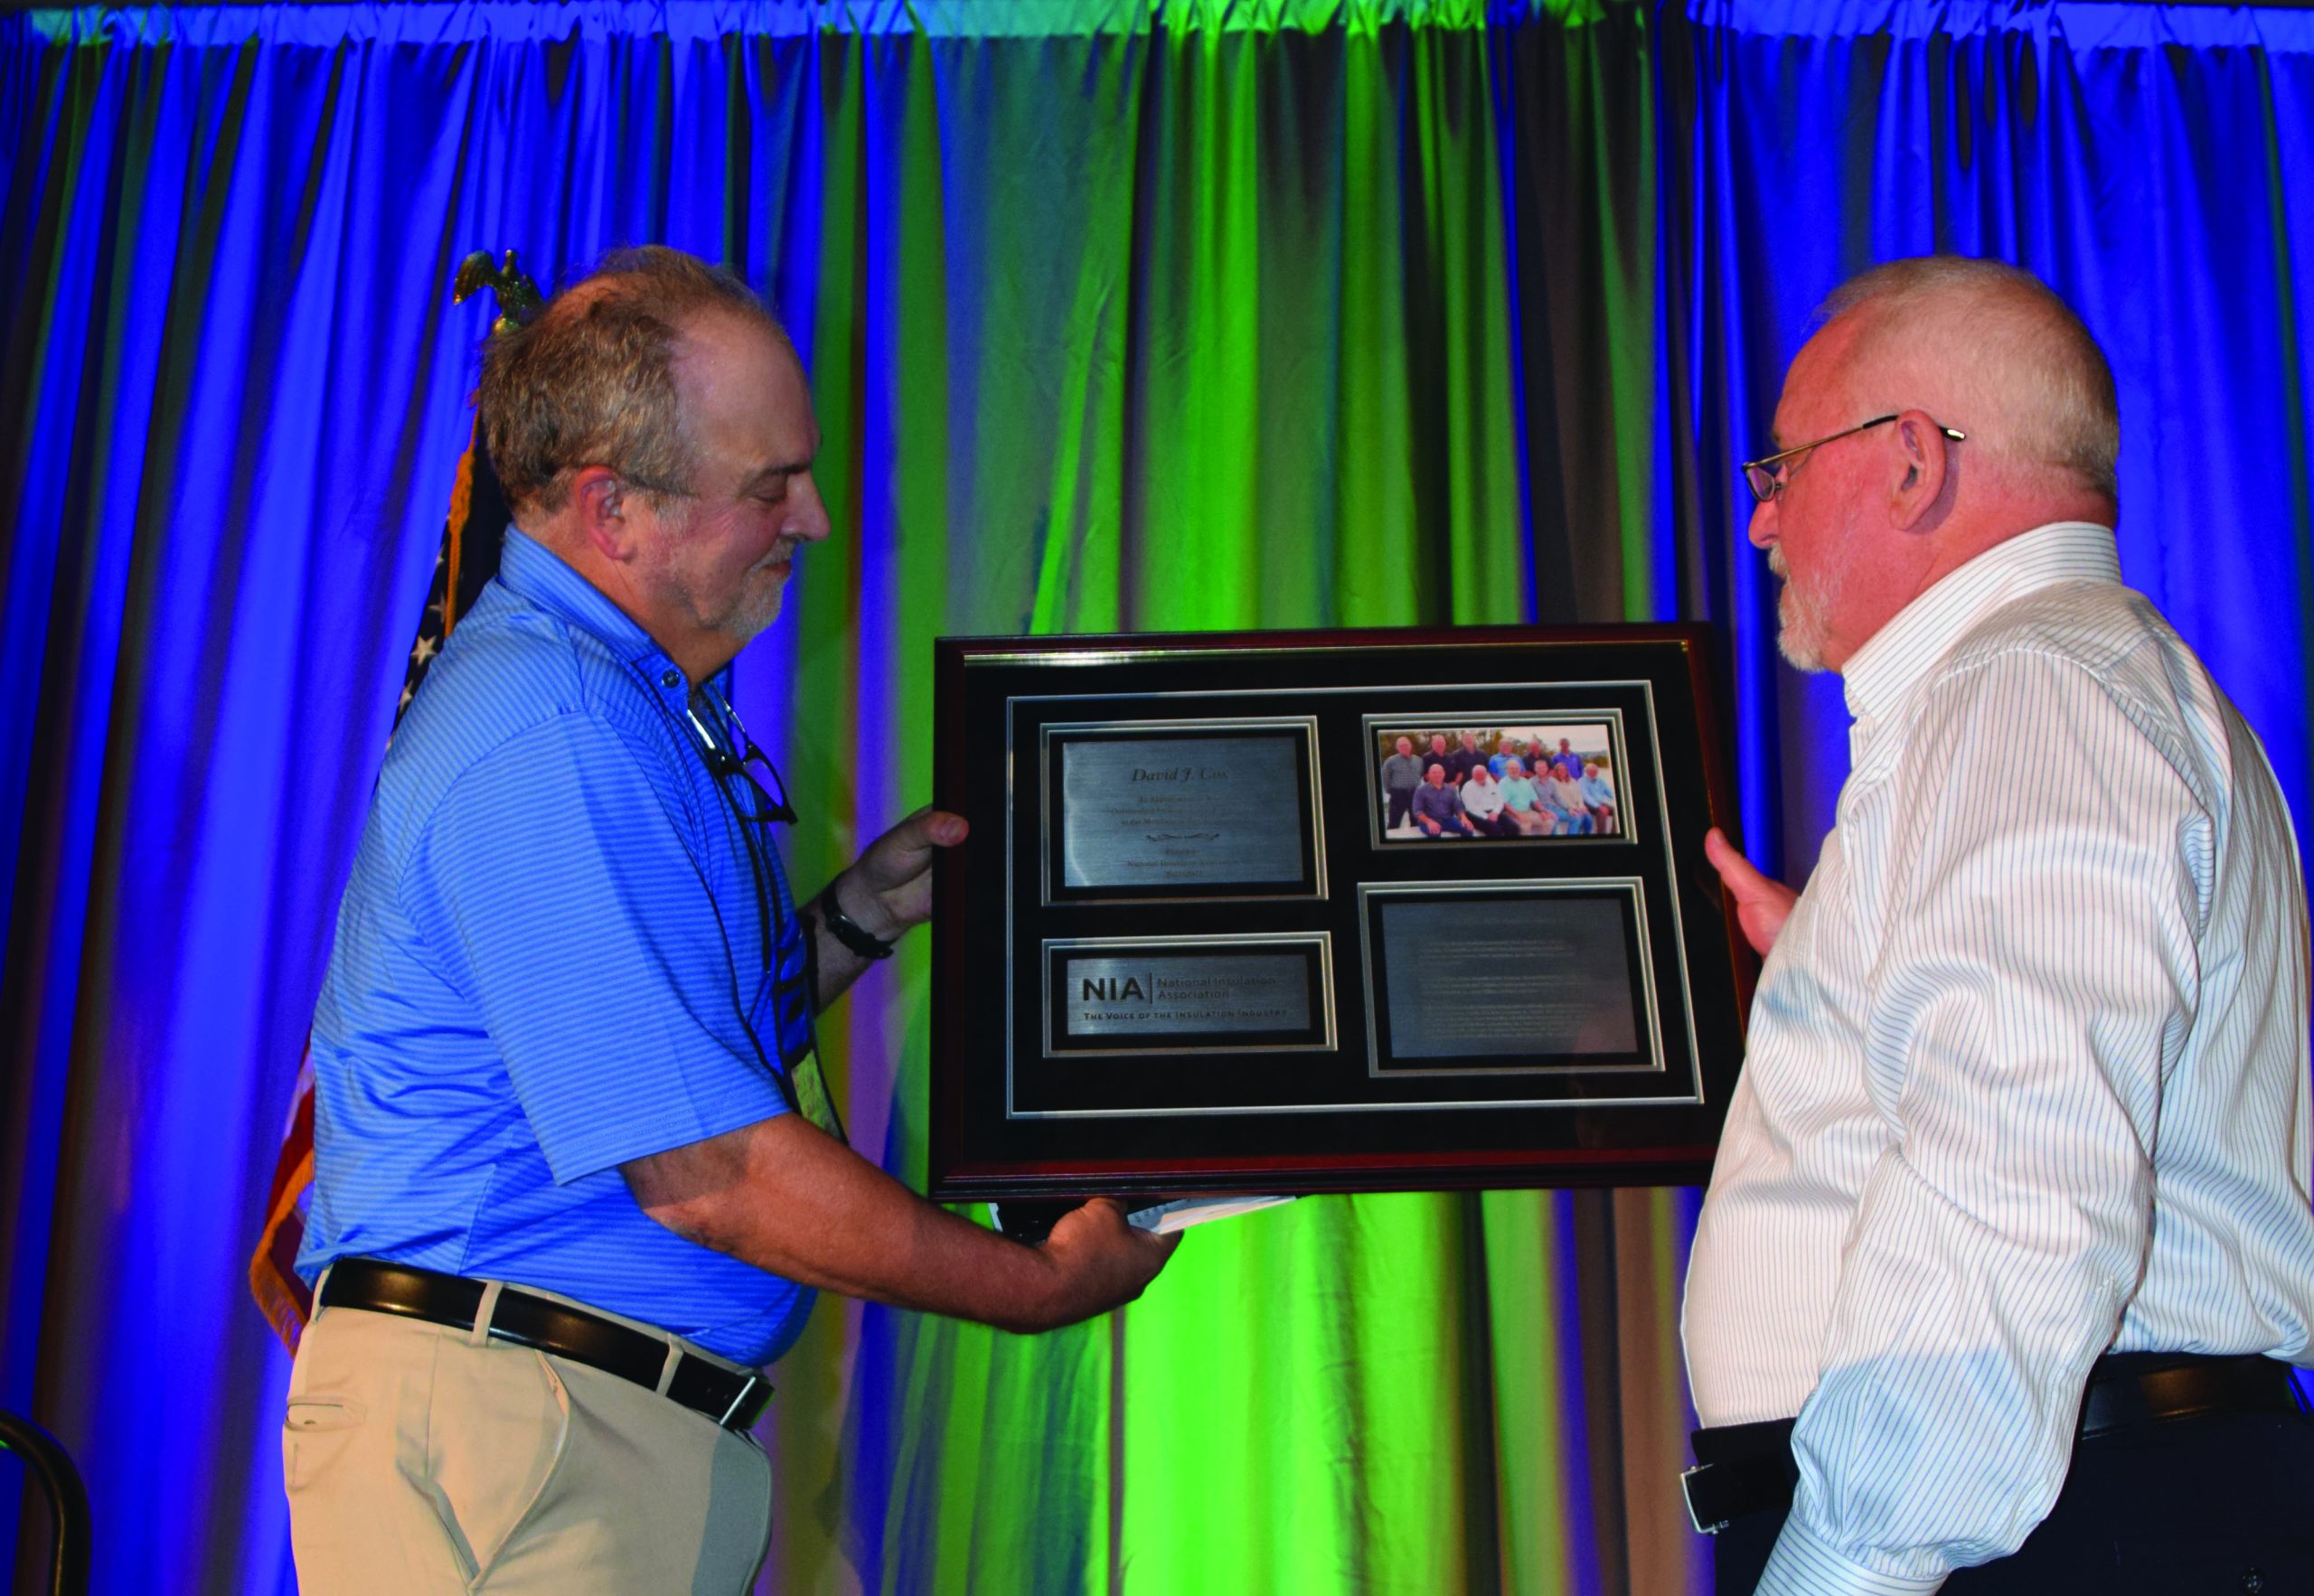 Outgoing NIA President receives an industry award presented by incoming President Joe Leo